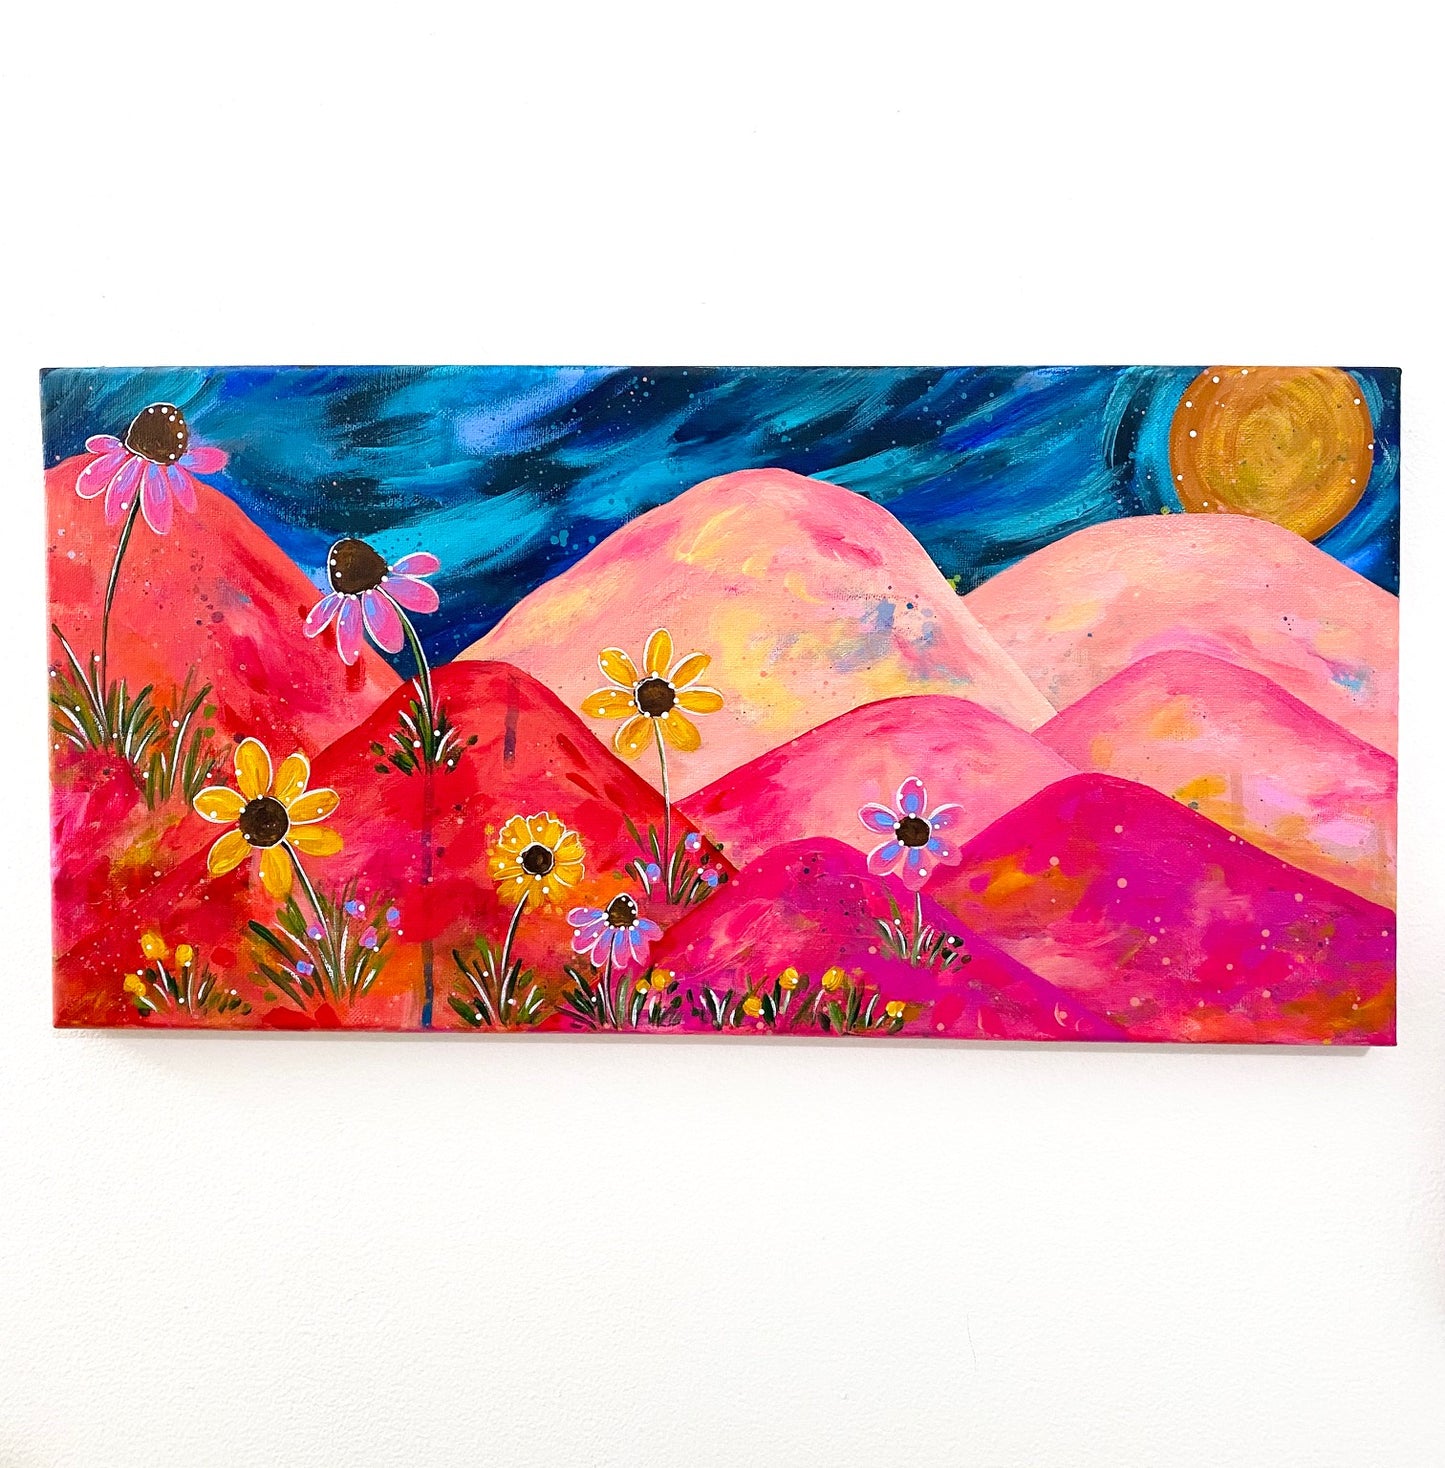 "Mountain Wildflowers" Landscape Original Painting on 10x20 inch Canvas